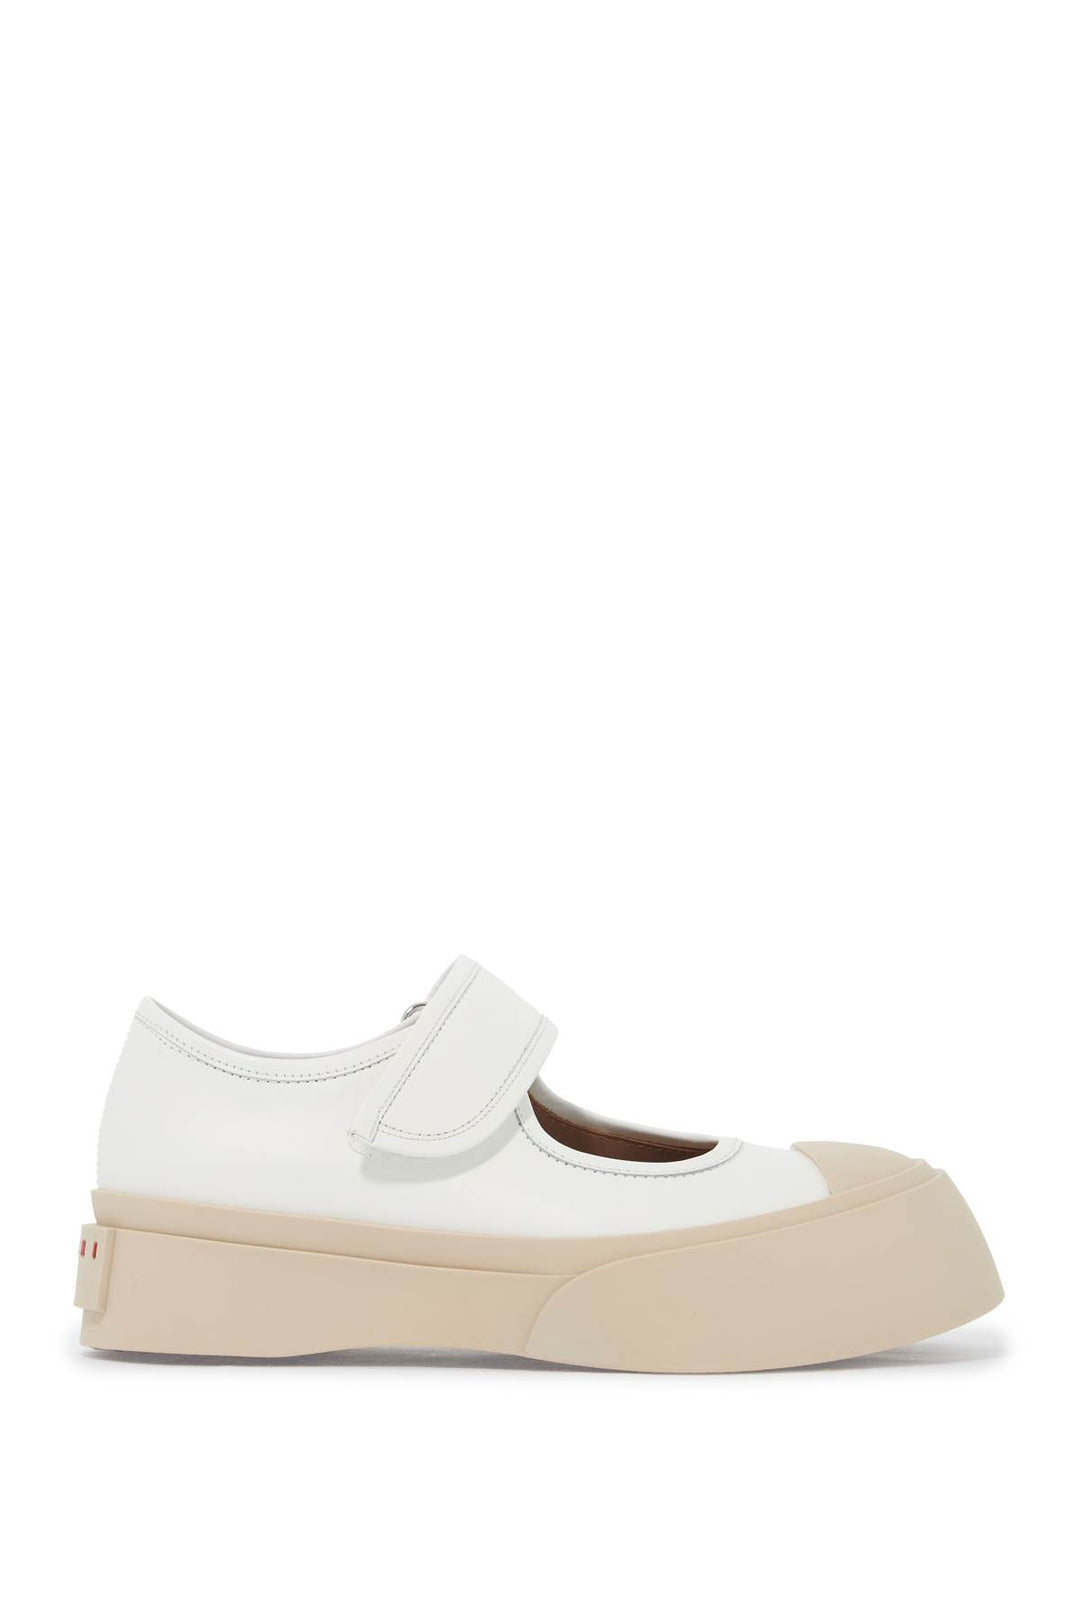 pablo mary jane nappa leather sneakers-0